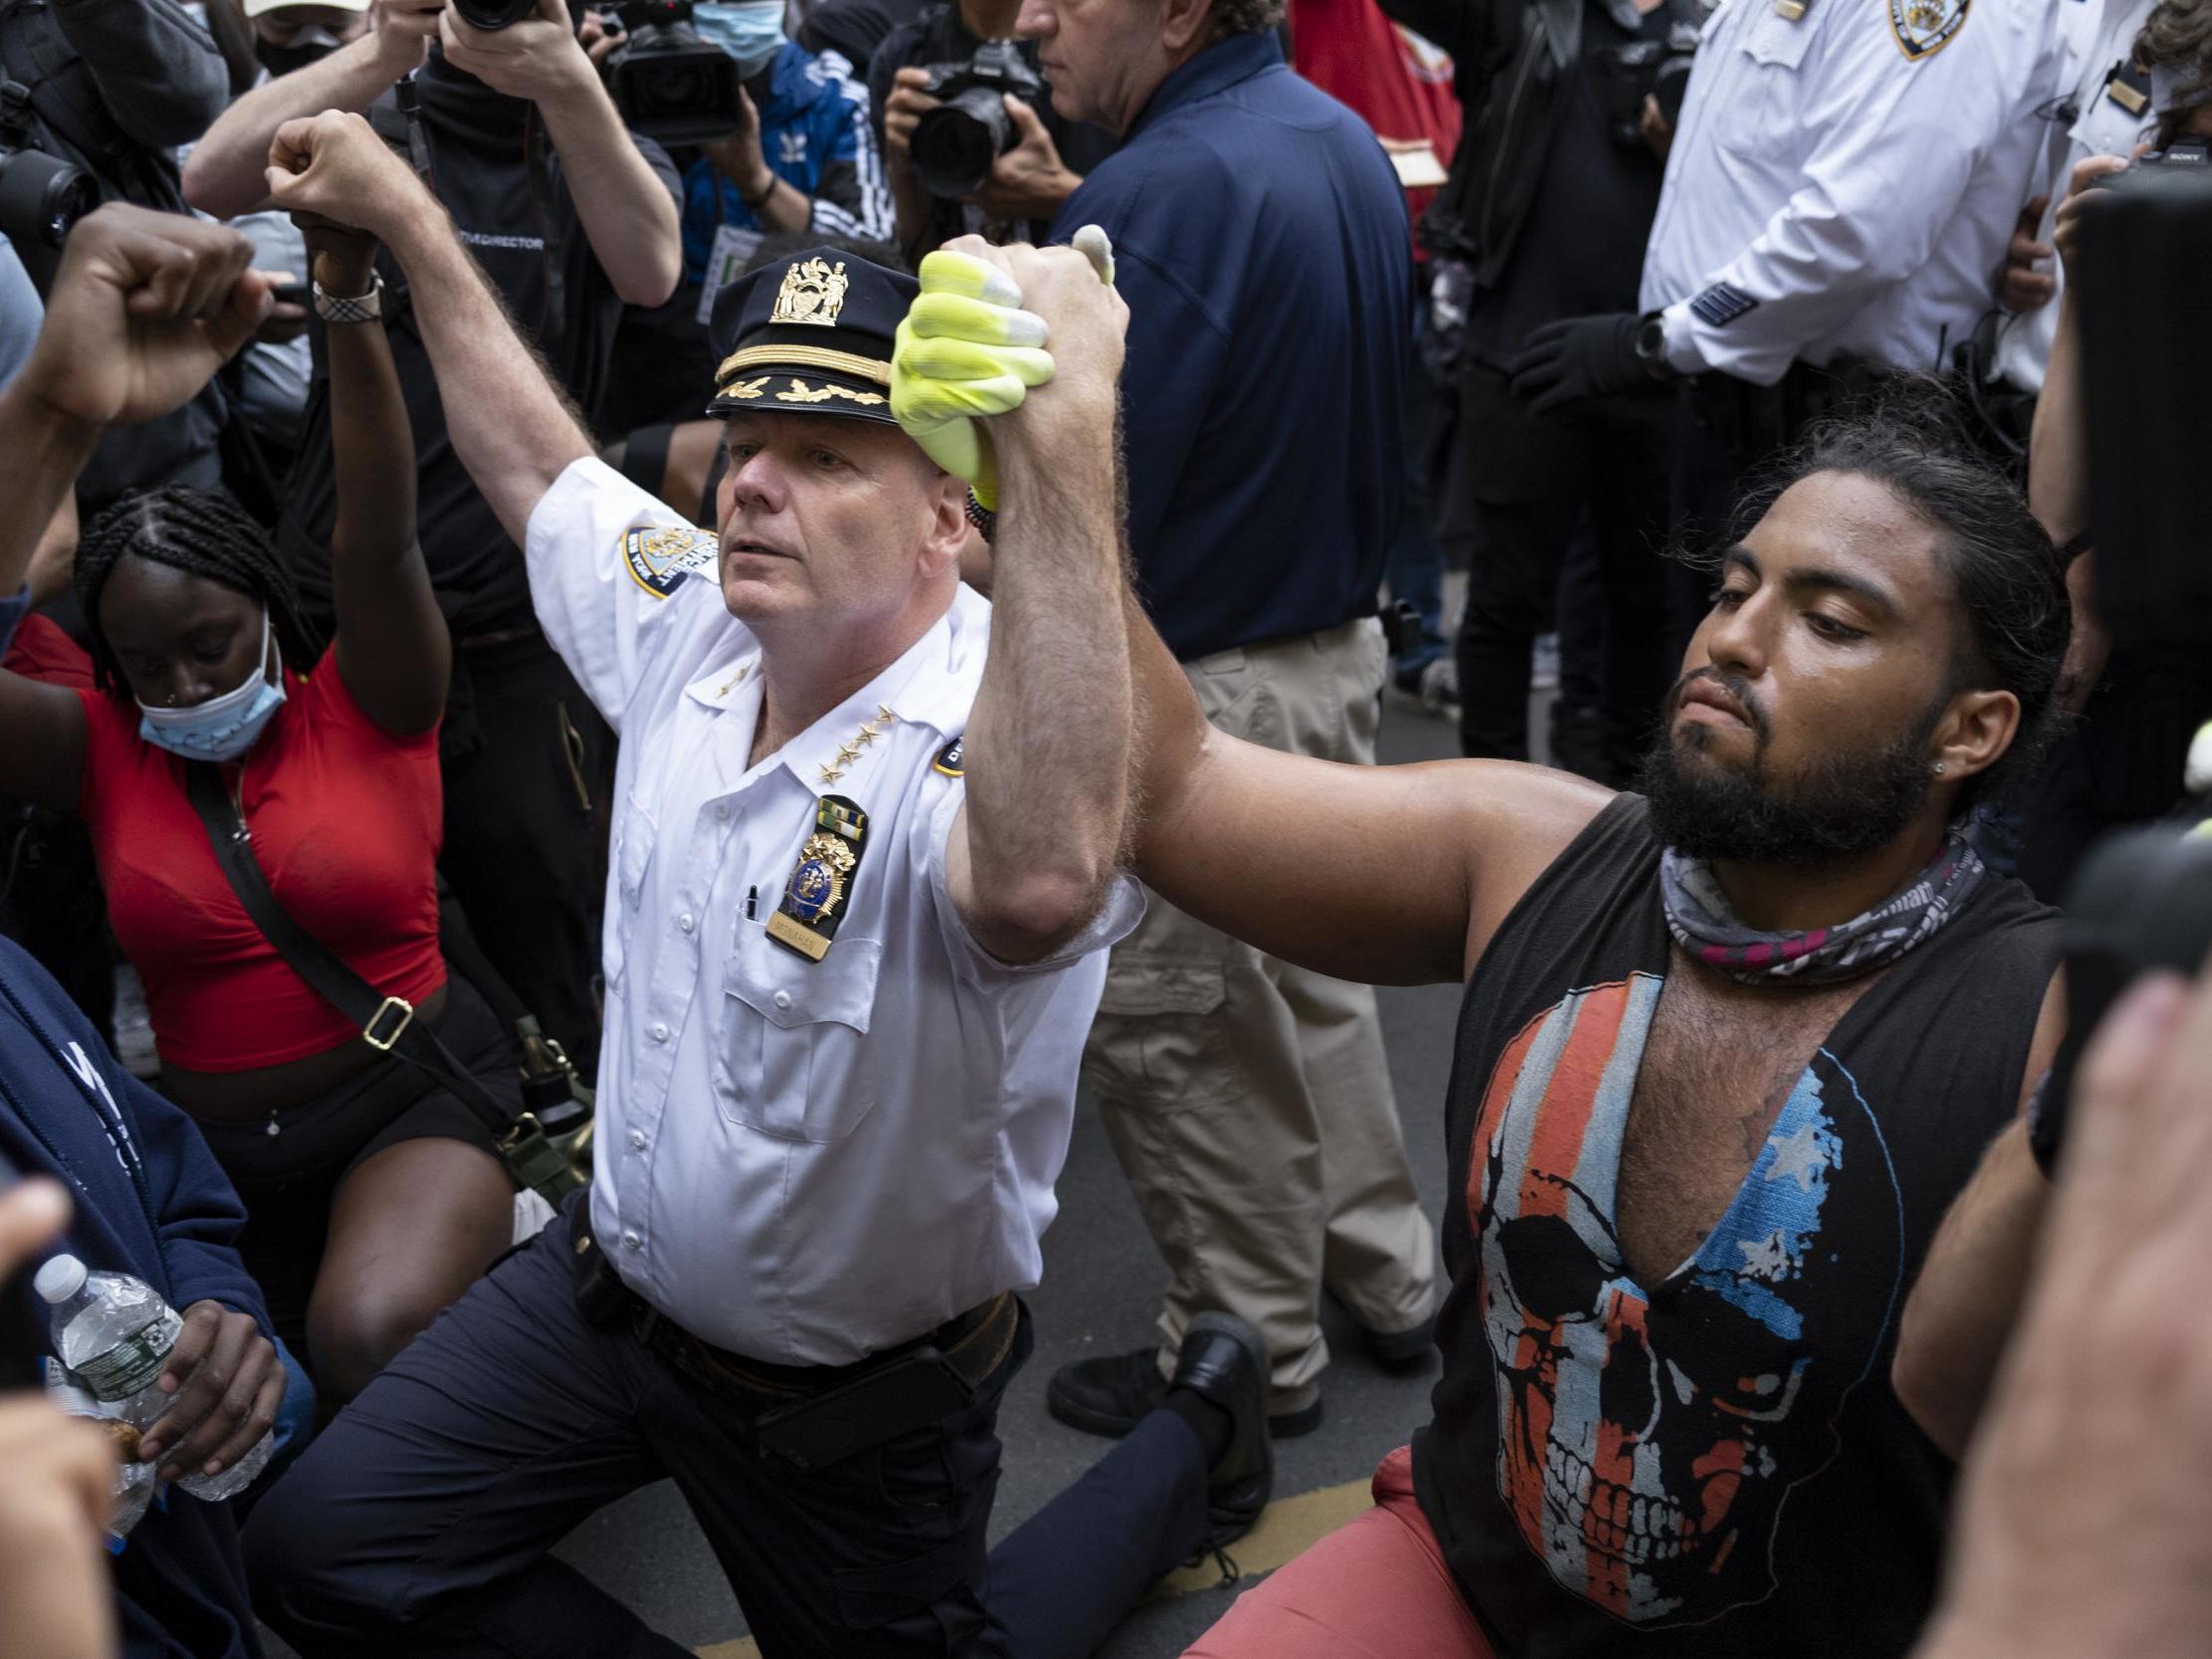 New York protests: NYPD chief kneels with demonstrators and calls for end to violence